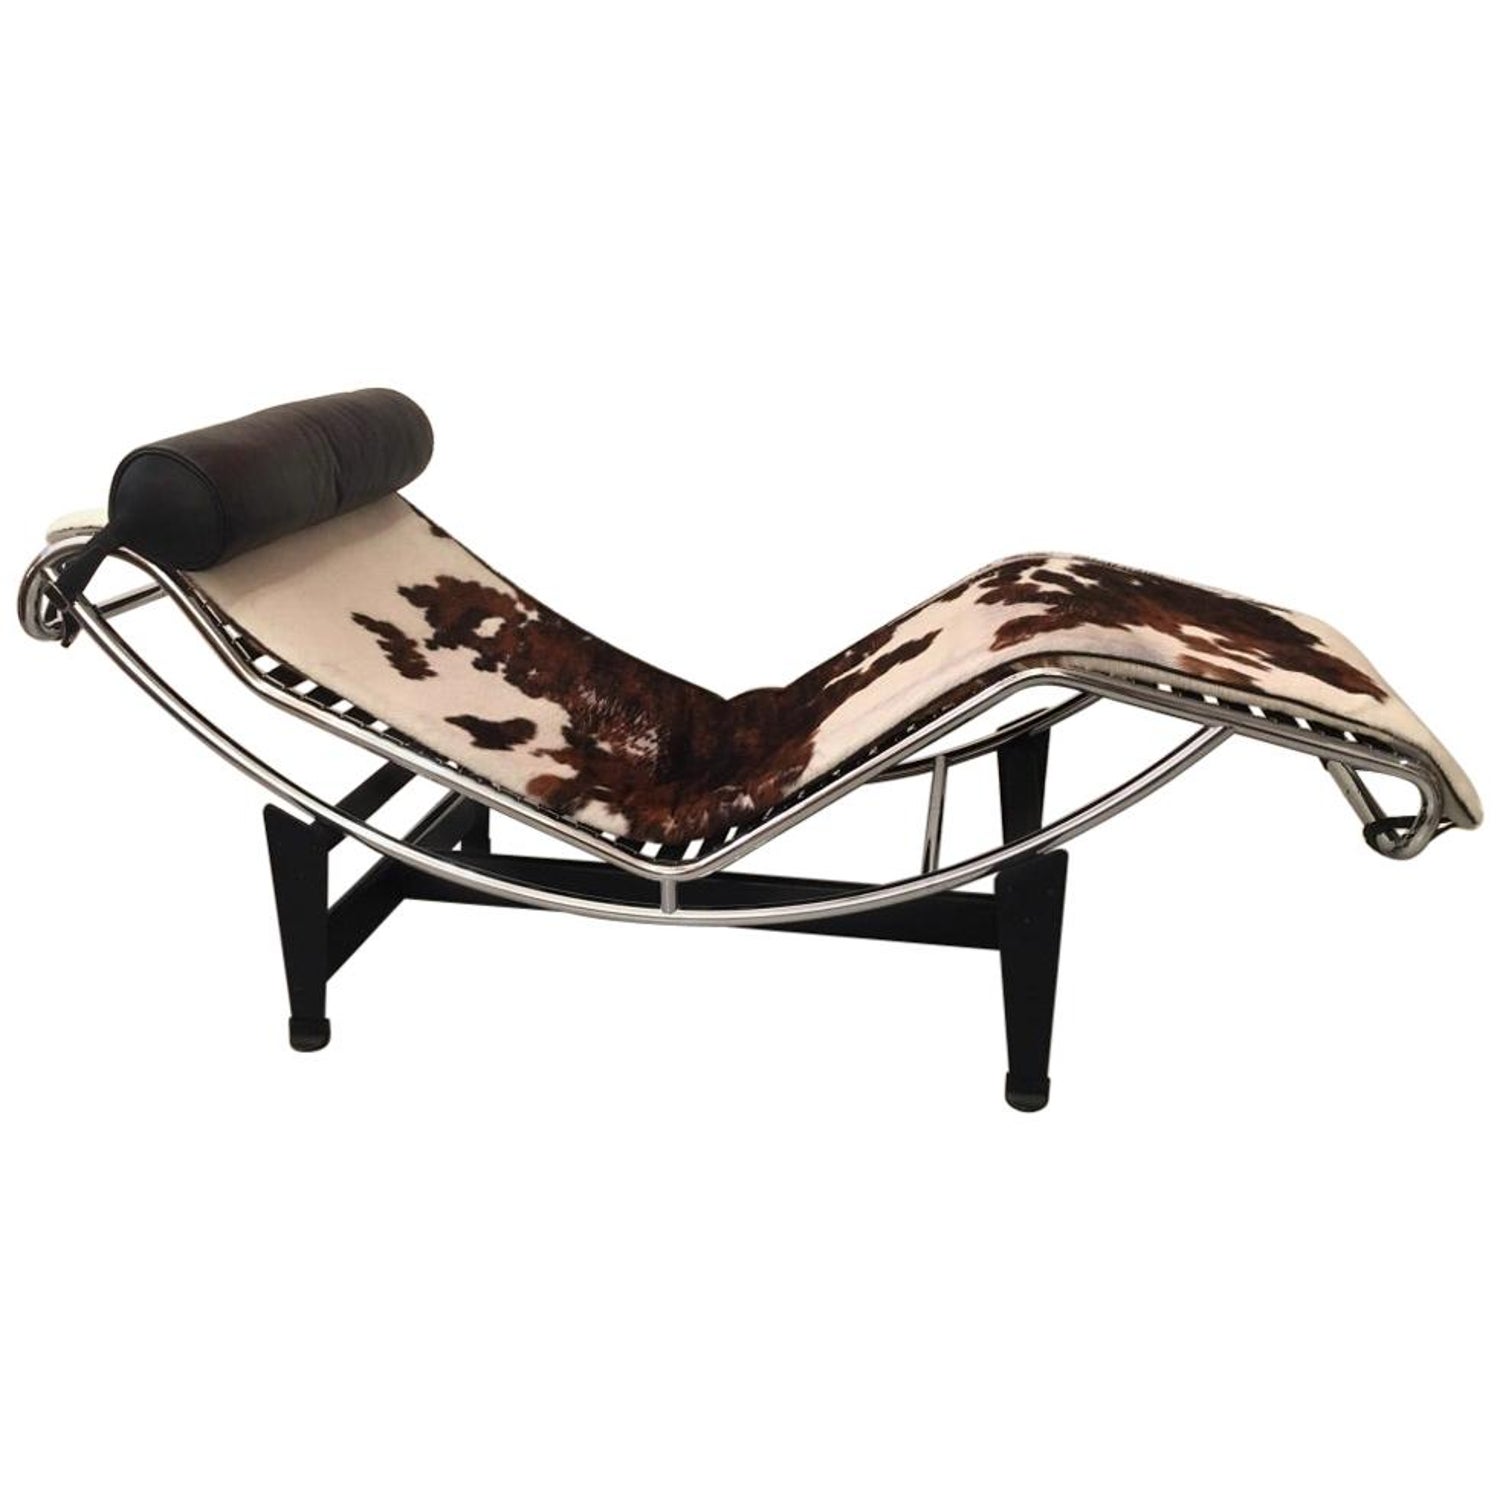 Cowhide Lc4 Lounge Chair By Le Corbusier For Cassina At 1stdibs